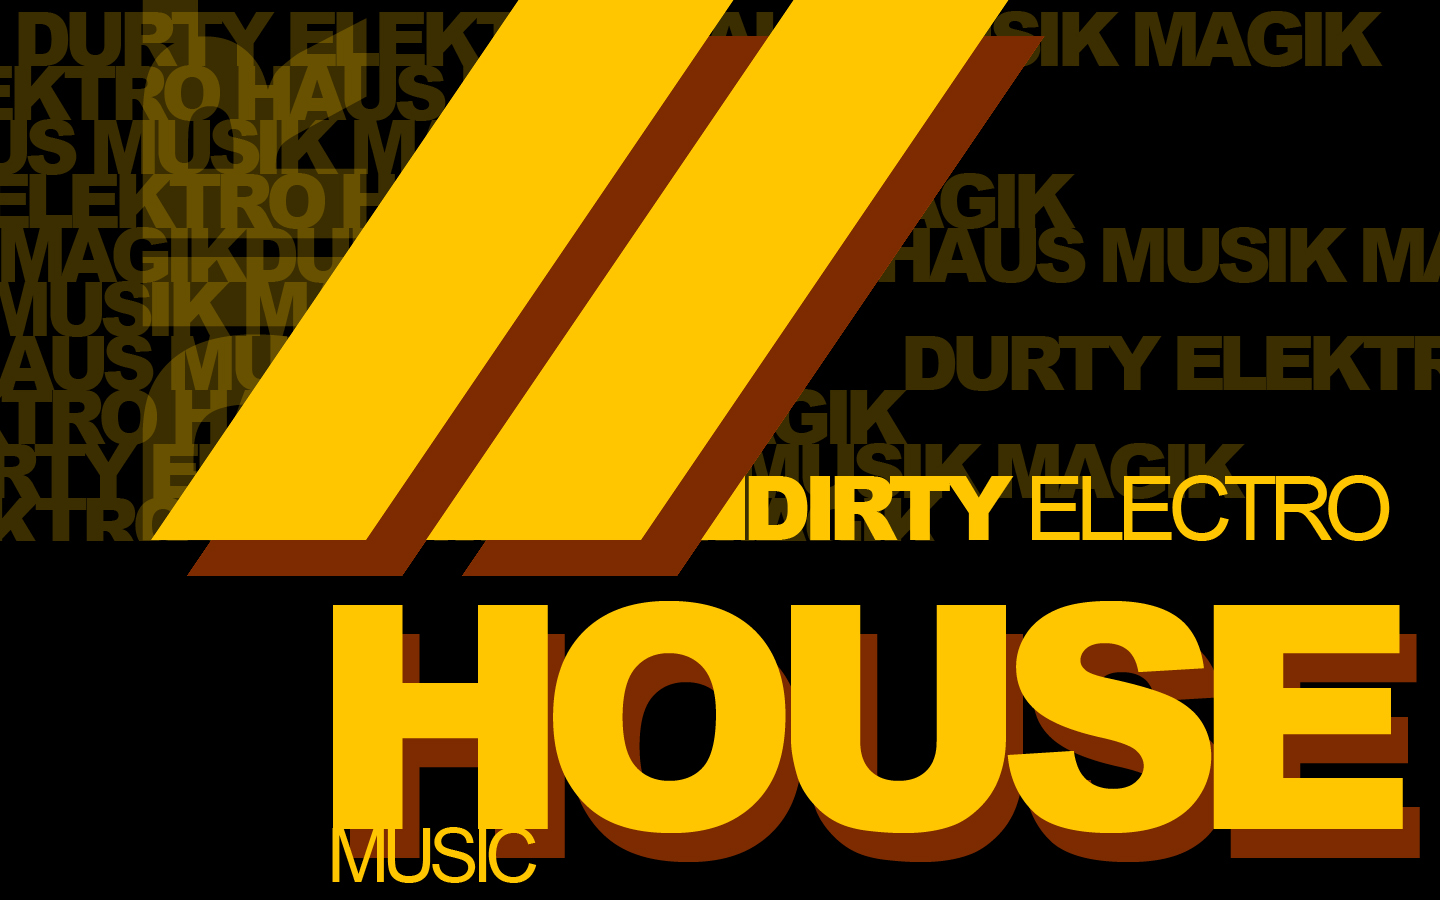 Dirty Electro House Wallpaper By Dj Fanta5t1c On Newgrounds